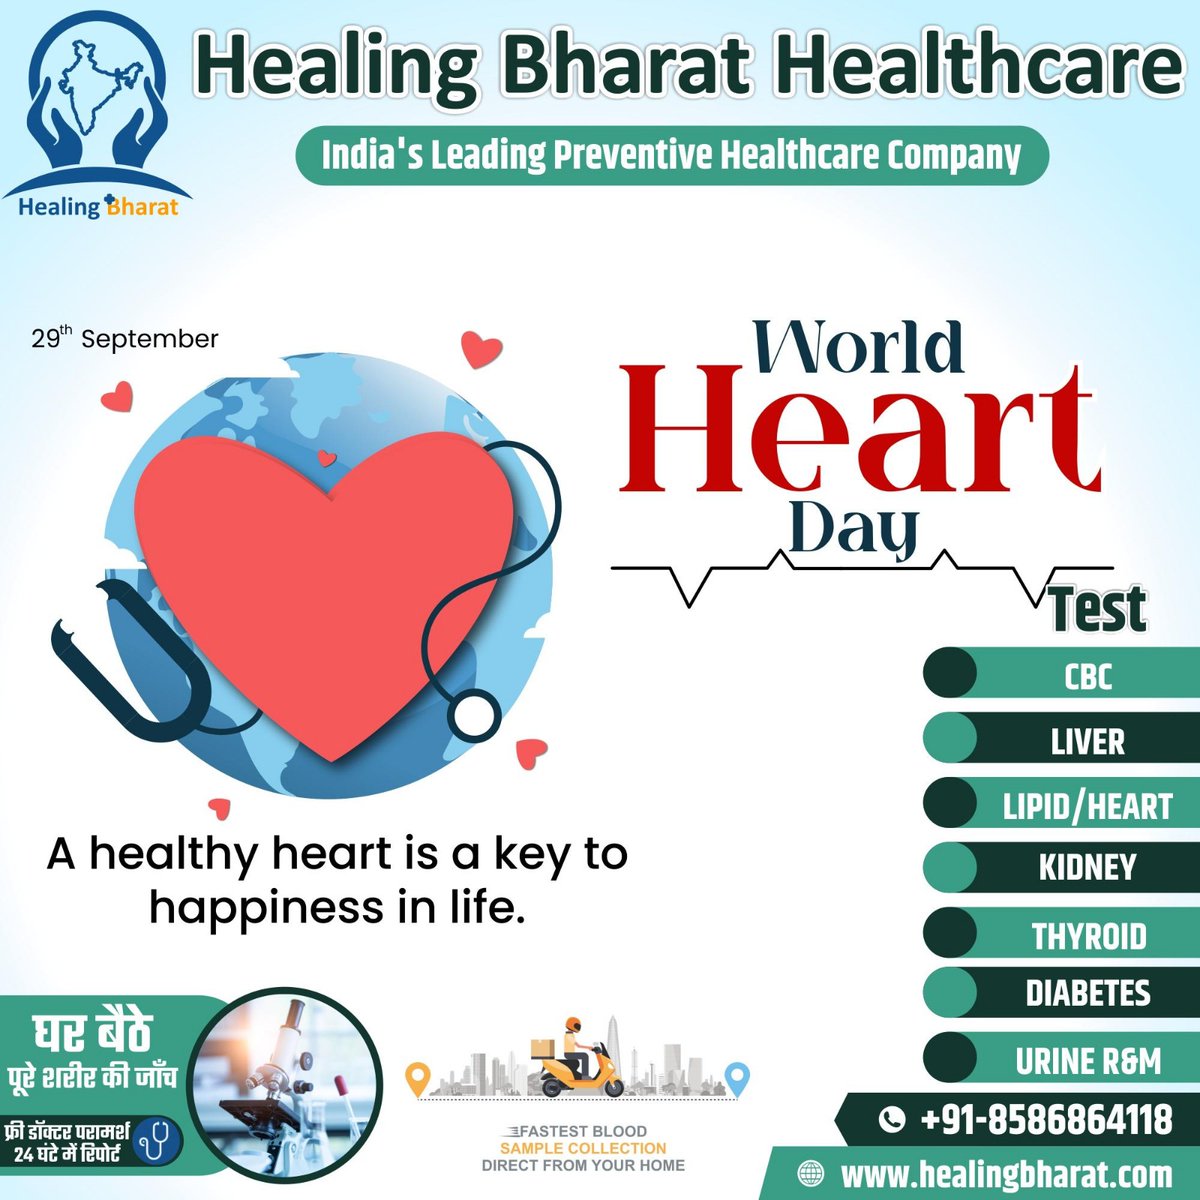 On #WorldHeartDay, let's pledge to love our hearts by making healthy choices every day.

#WorldHeartDay2023 #HealingBharat #health #healthcheckup